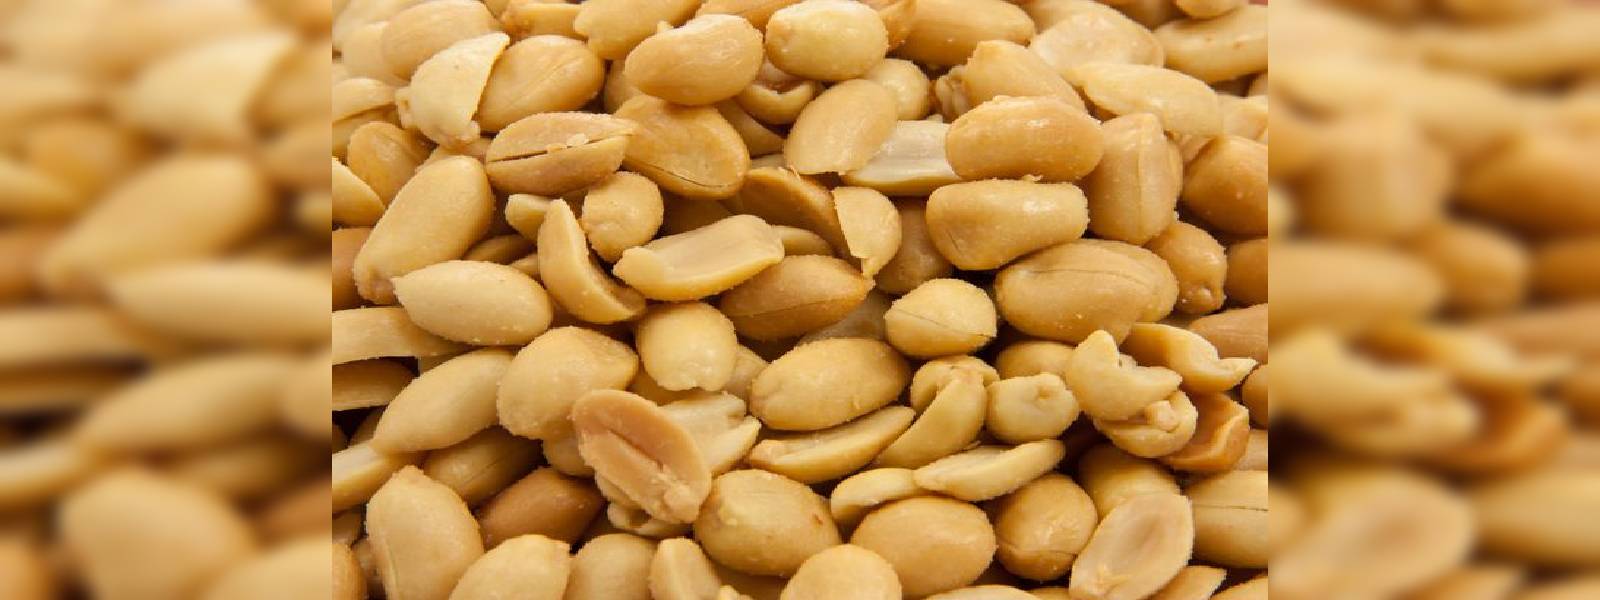 Expired peanut re-packaging ring busted: Police